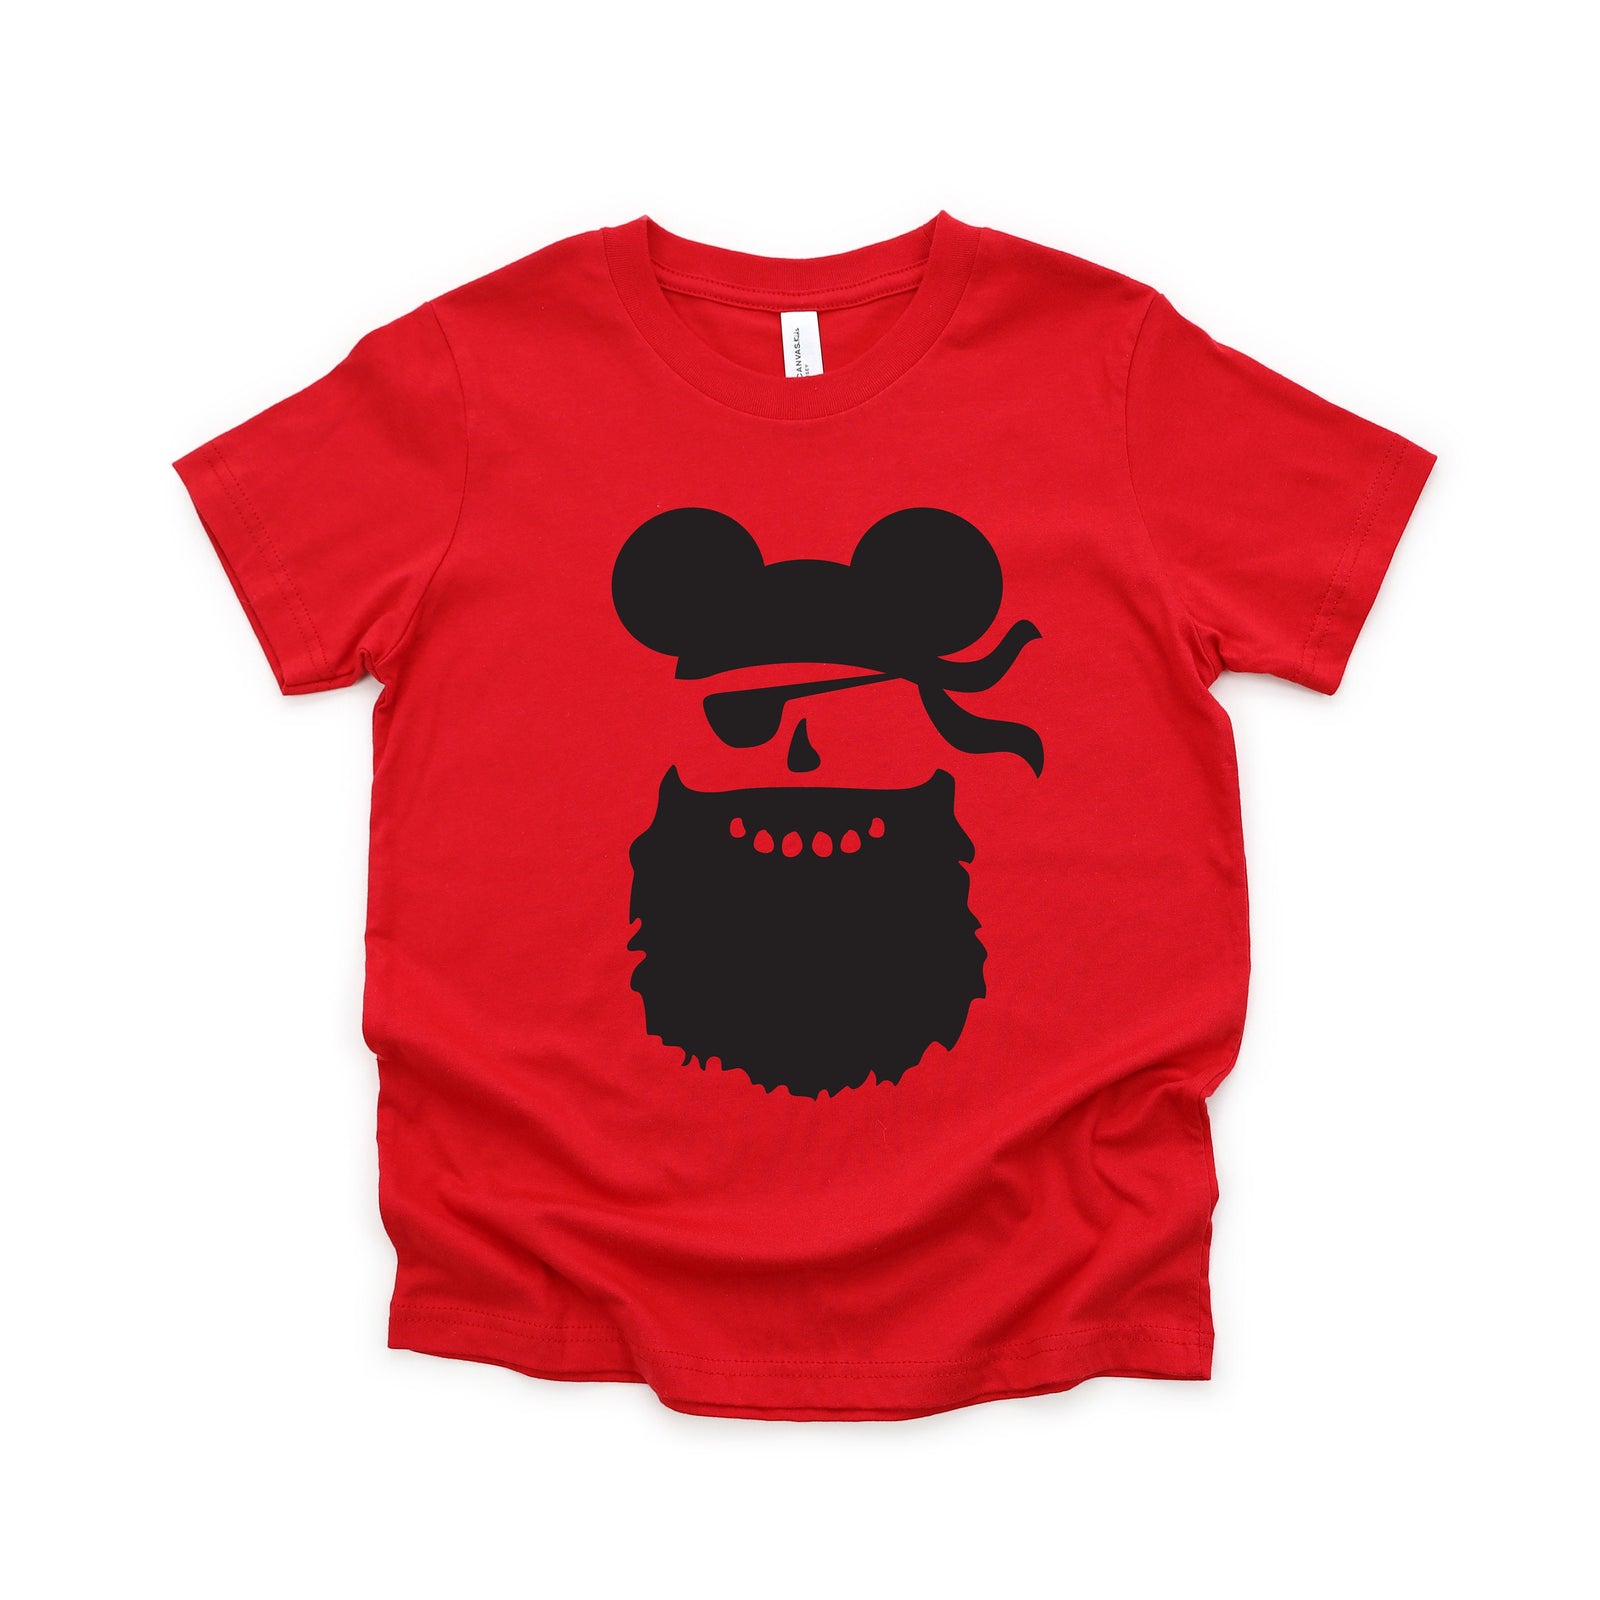 Bearded Pirate Mickey Mouse Youth T Shirt - Disney Kids Mickey T Shirts - Disney Matching Family Shirts - Ahoy - Pirate's Life